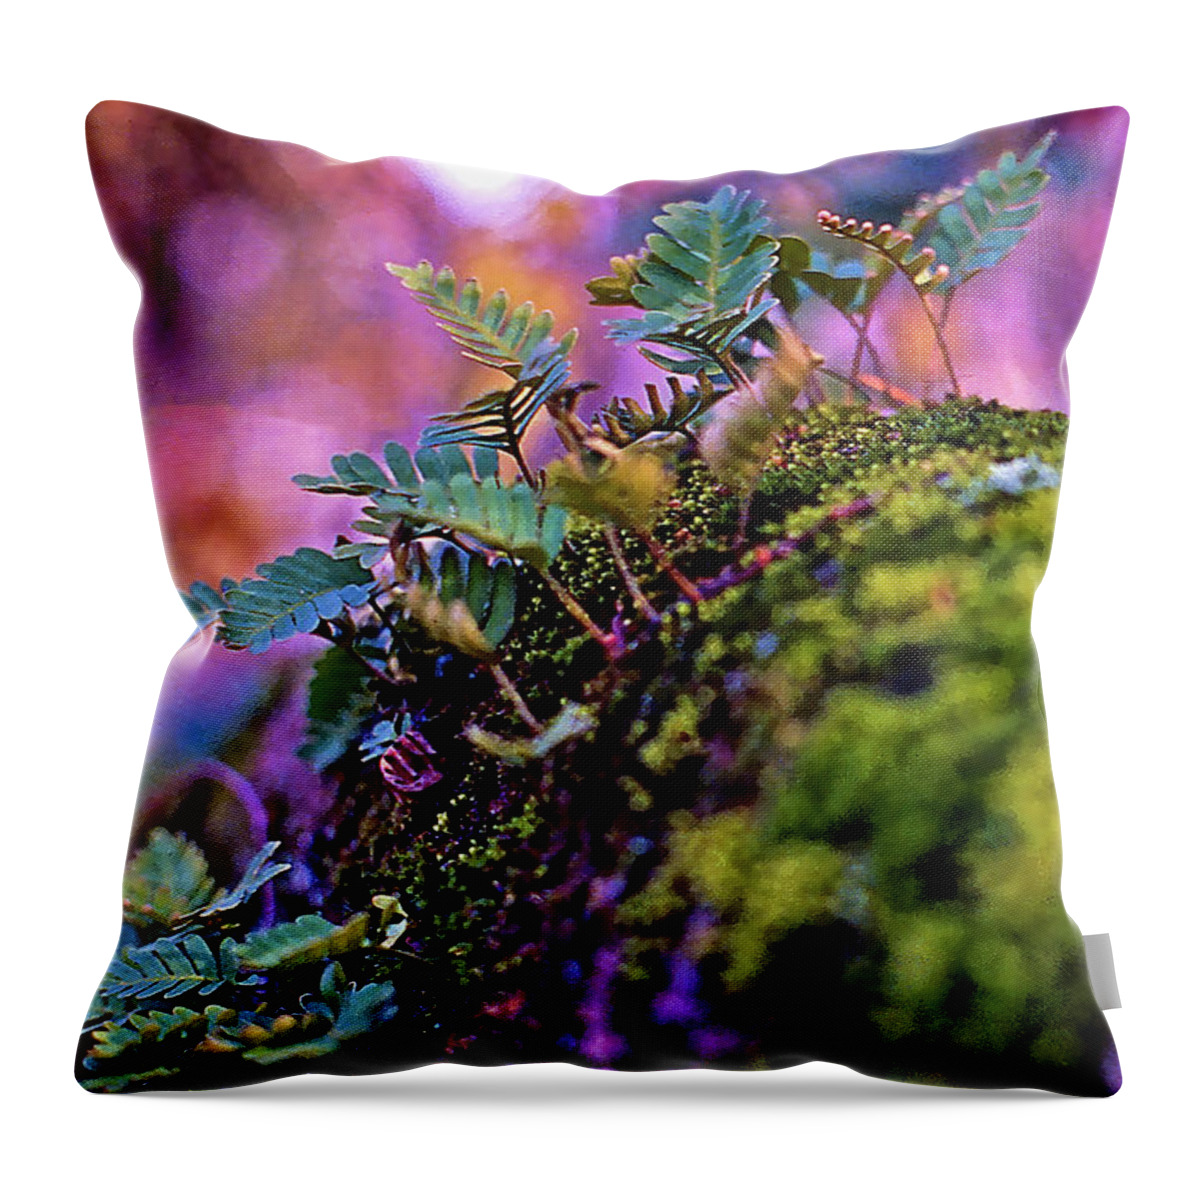 Leaves On A Log Throw Pillow featuring the photograph Leaves On A Log by Bellesouth Studio